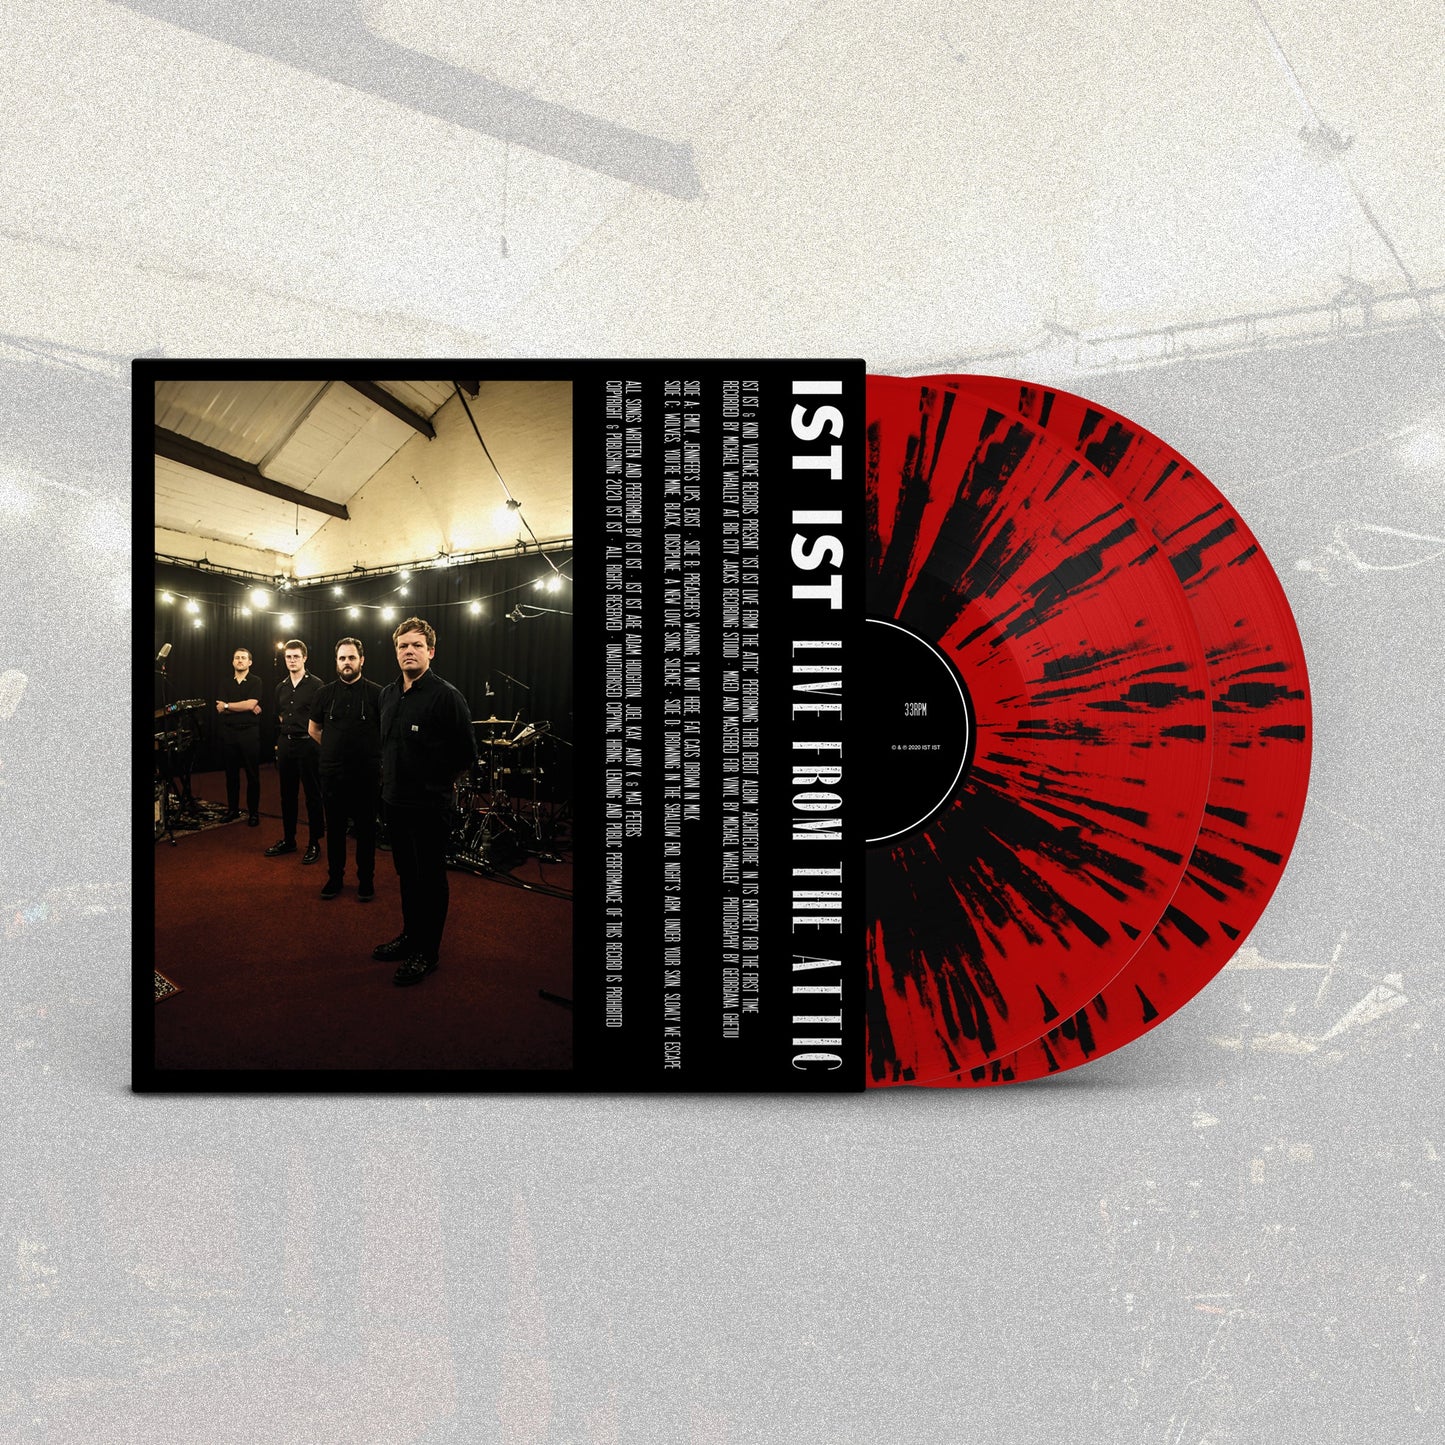 IST IST - ‘Live From The Attic’ 2x LP - Vinyl - Red and Black Splatter Heavyweight 12" Discs